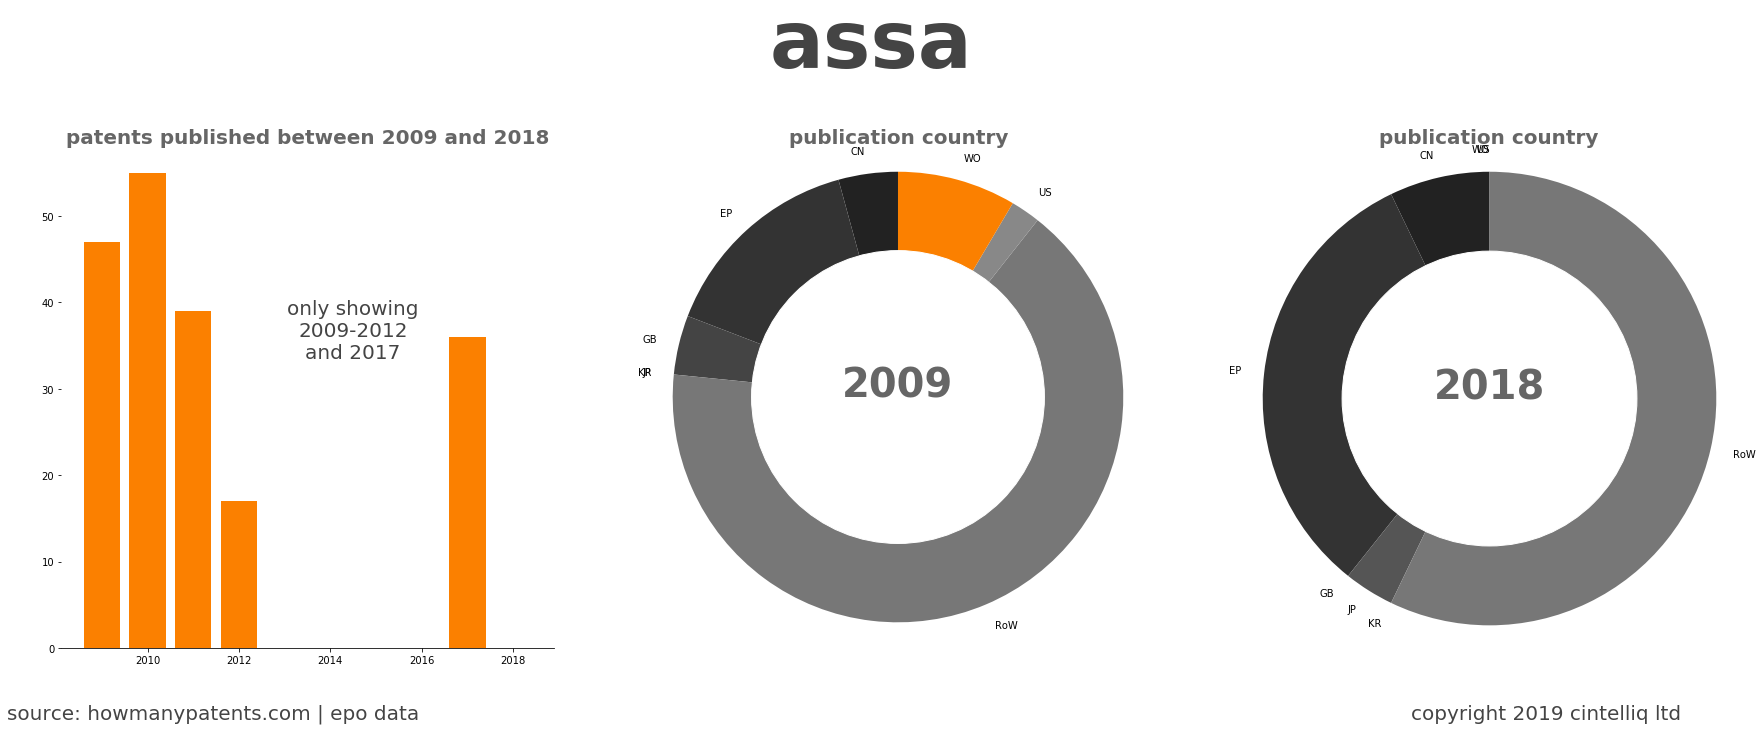 summary of patents for Assa